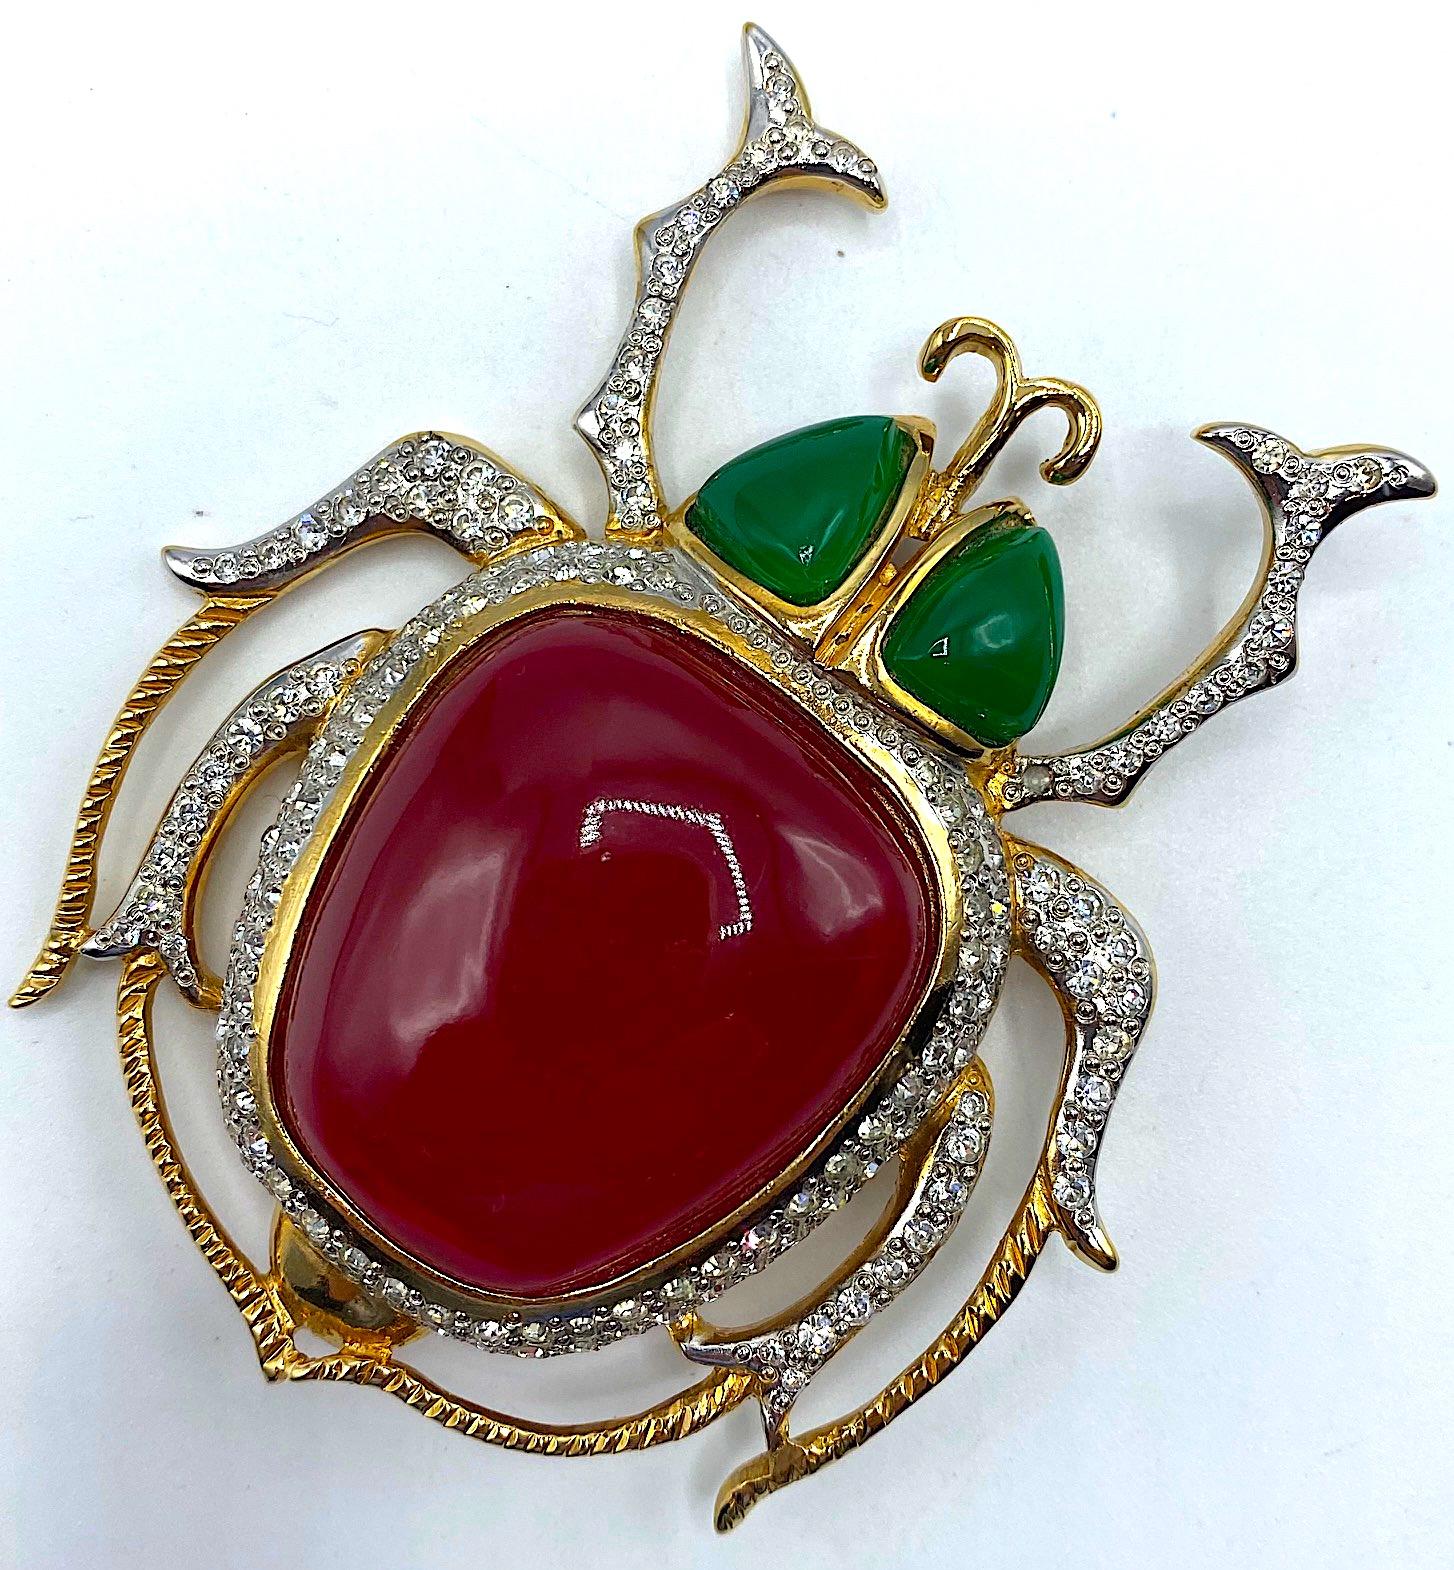 A beautiful and large scarab brooch by famous fashion house Maison Valentino circa 1990. The gold plate brooch is set with rhinestones and green resin molded cabochons for eyes and a large red resin cabochon stone for the body. The brooch measures